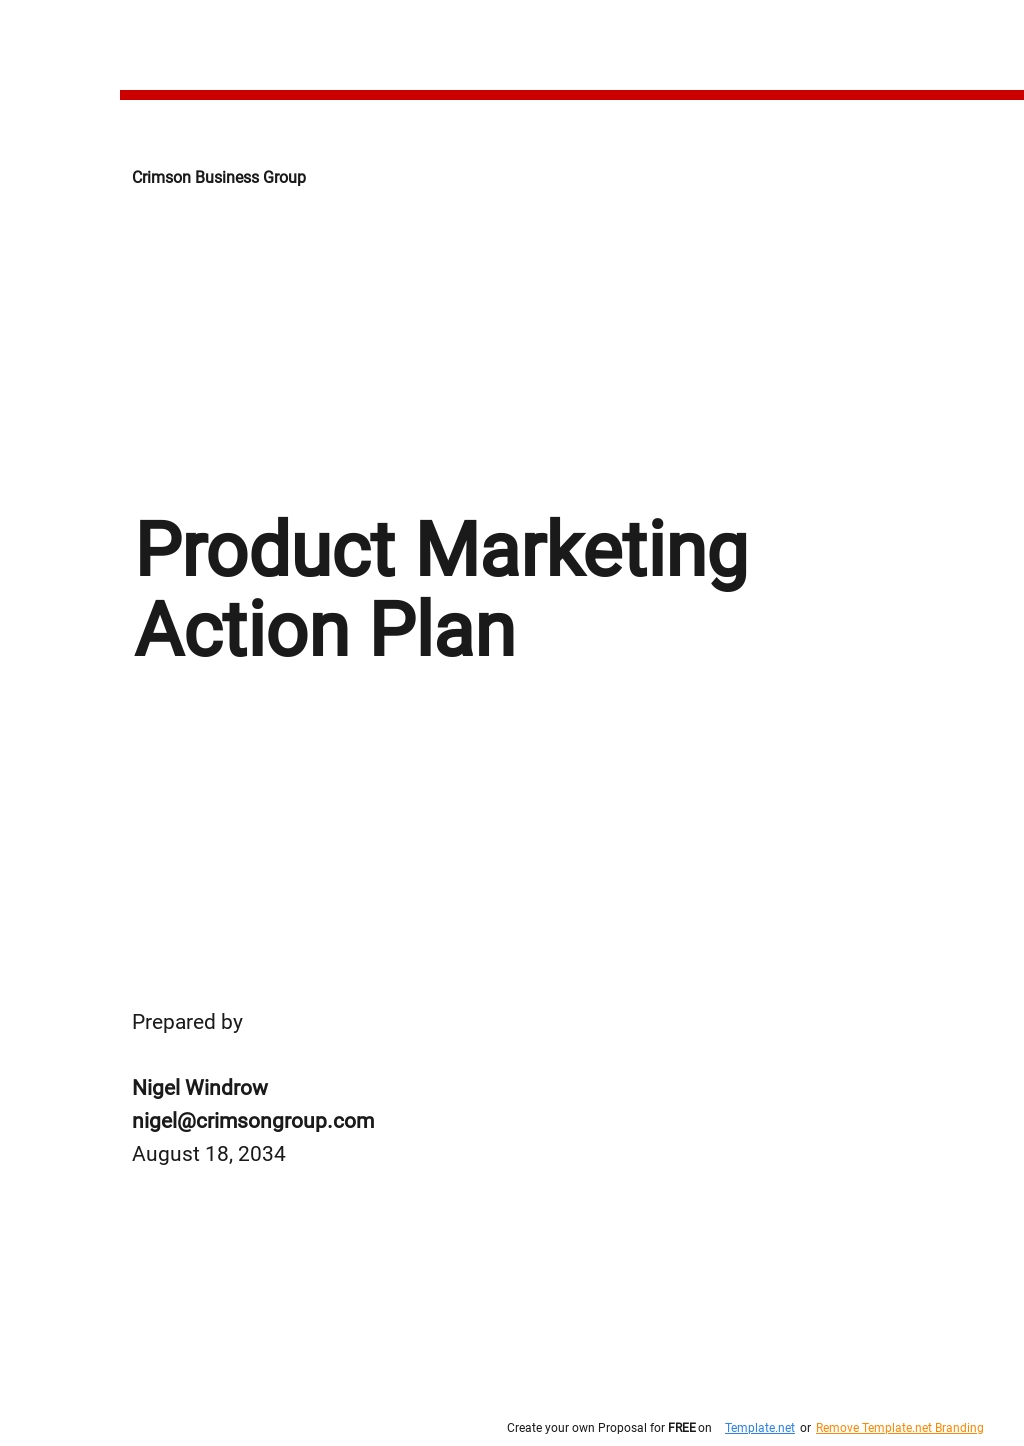 Product Marketing Action Plan Template.jpe